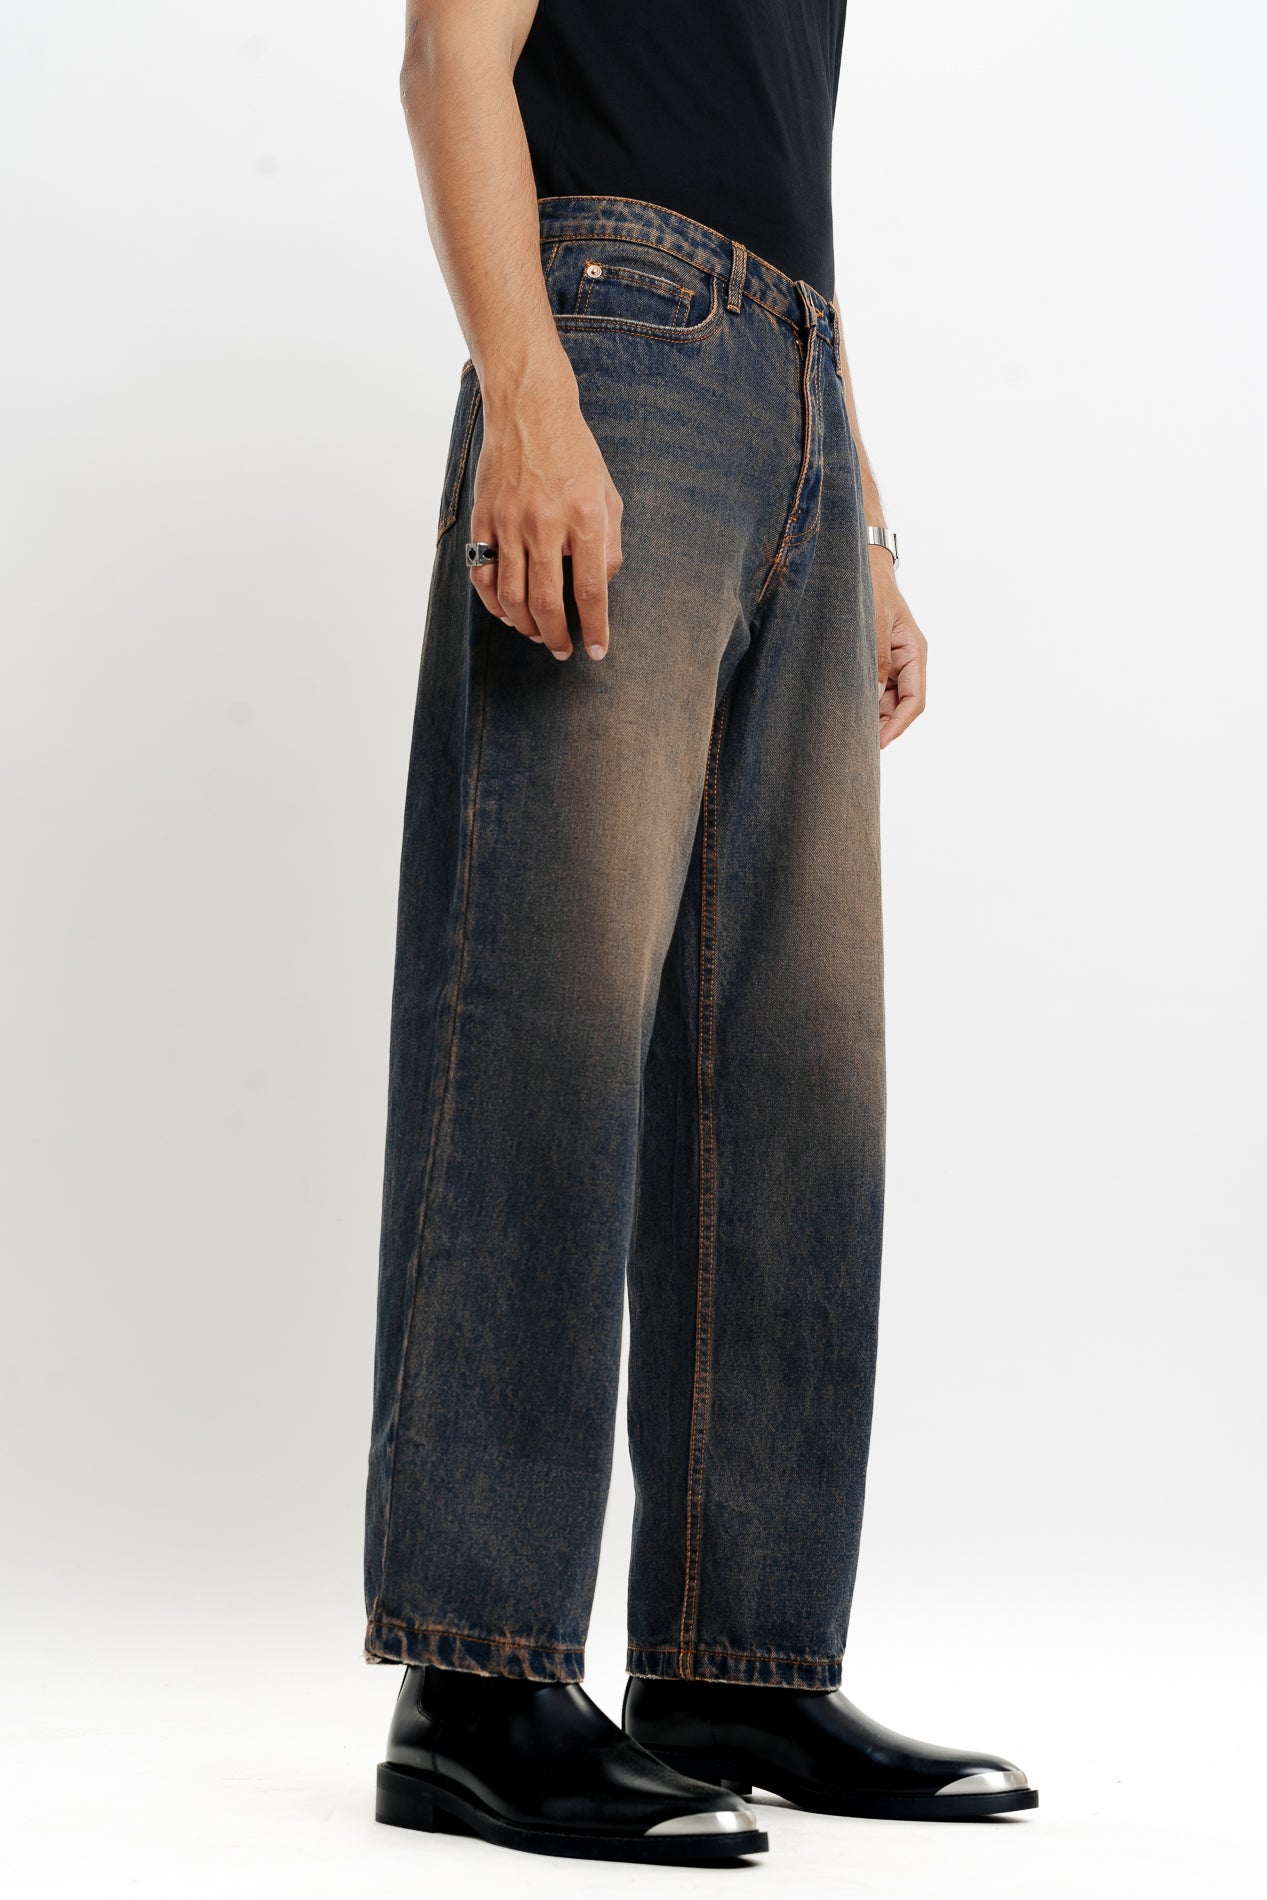 TINTED MEN'S WIDE JEANS